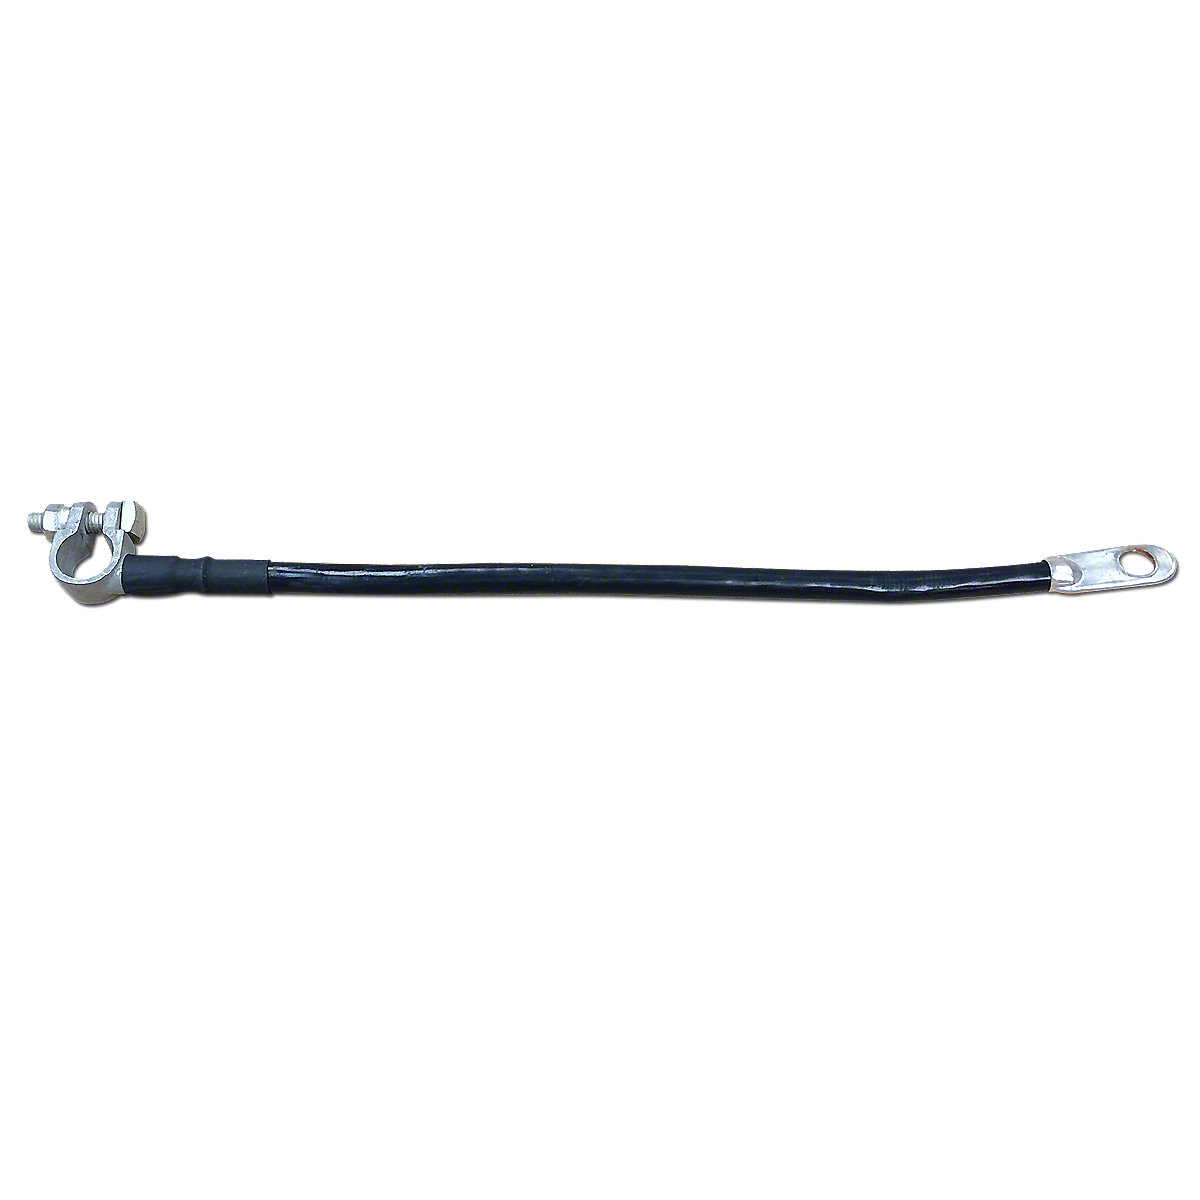 14-1/2 Battery Cable For Massey Harris And Massey Ferguson Tractors.